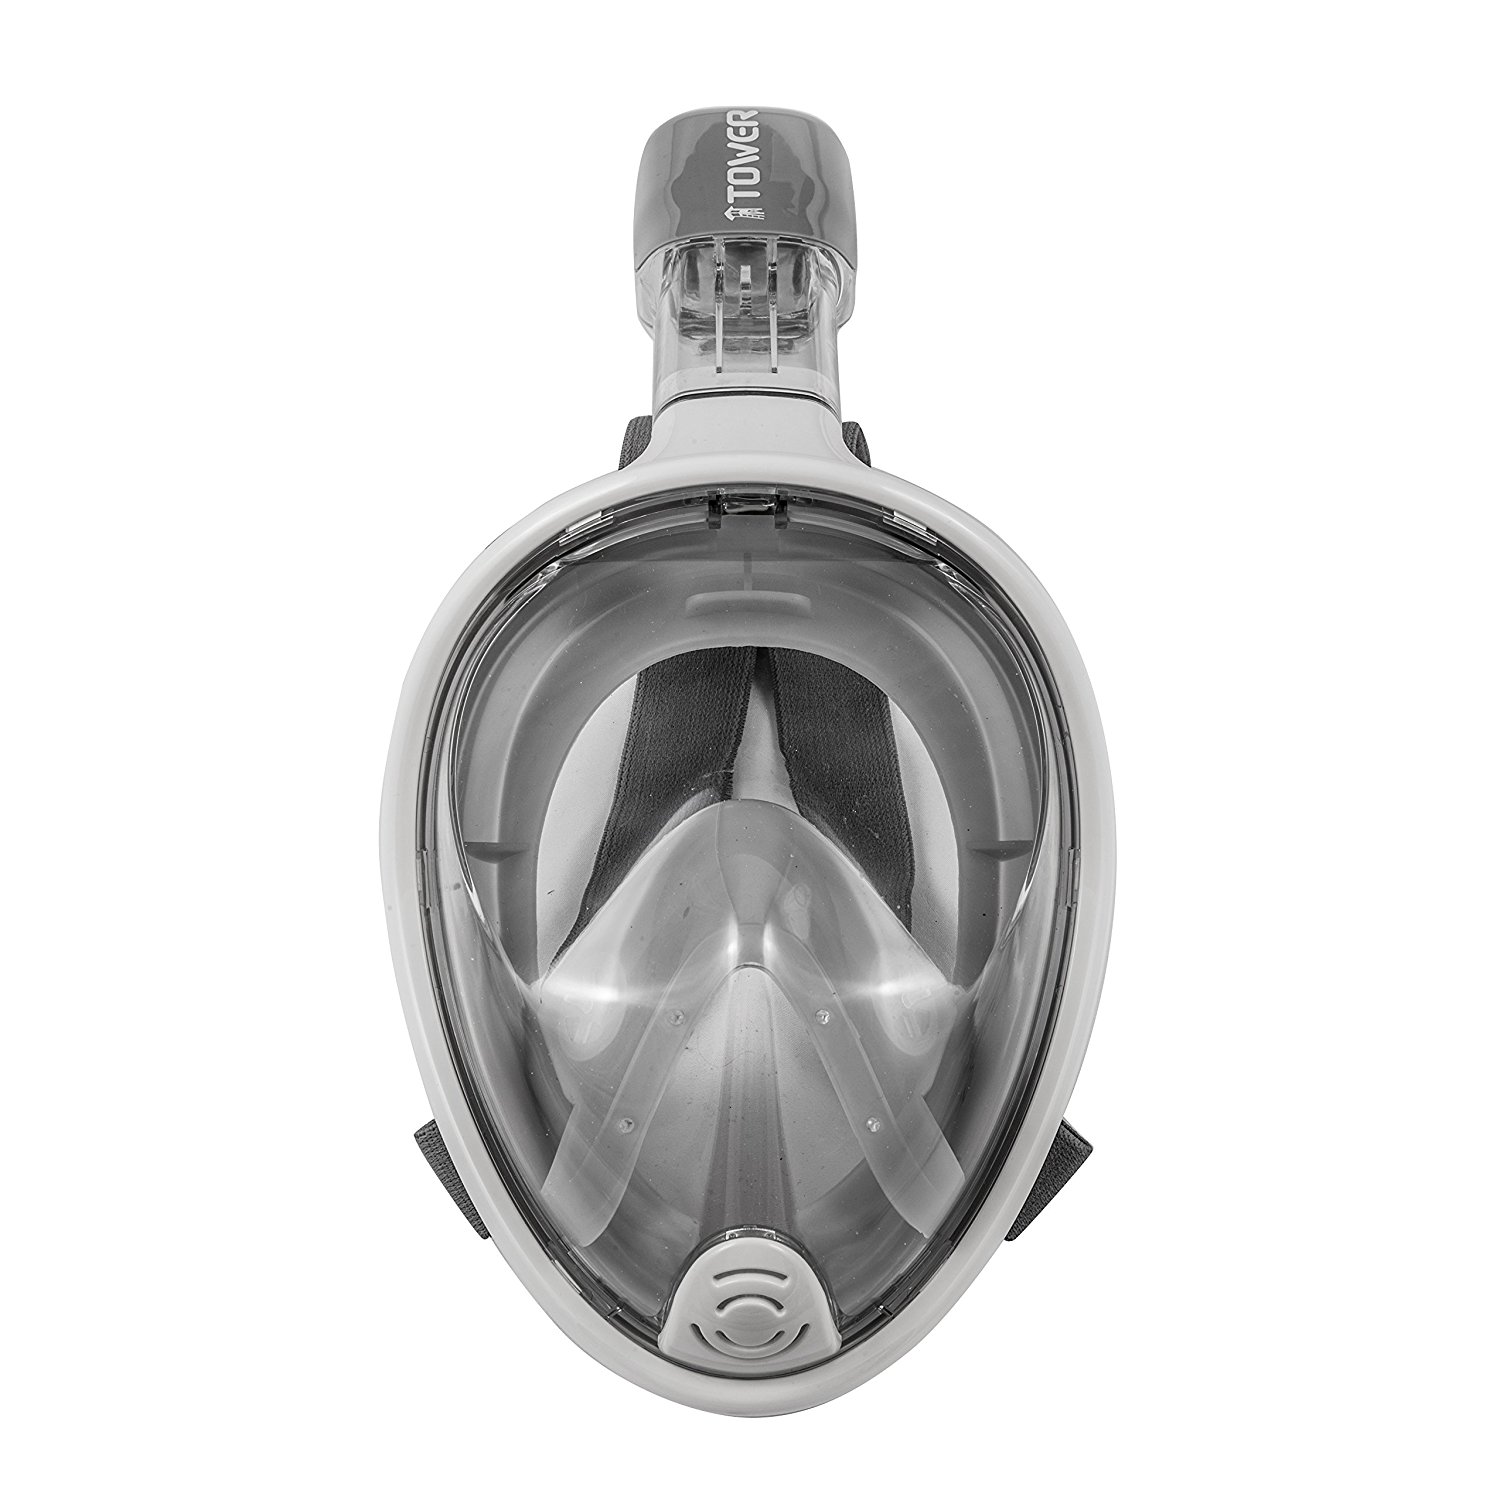 Save 62% on a Tower Paddle Boards Full Face Snorkel Mask! Just $49.00!